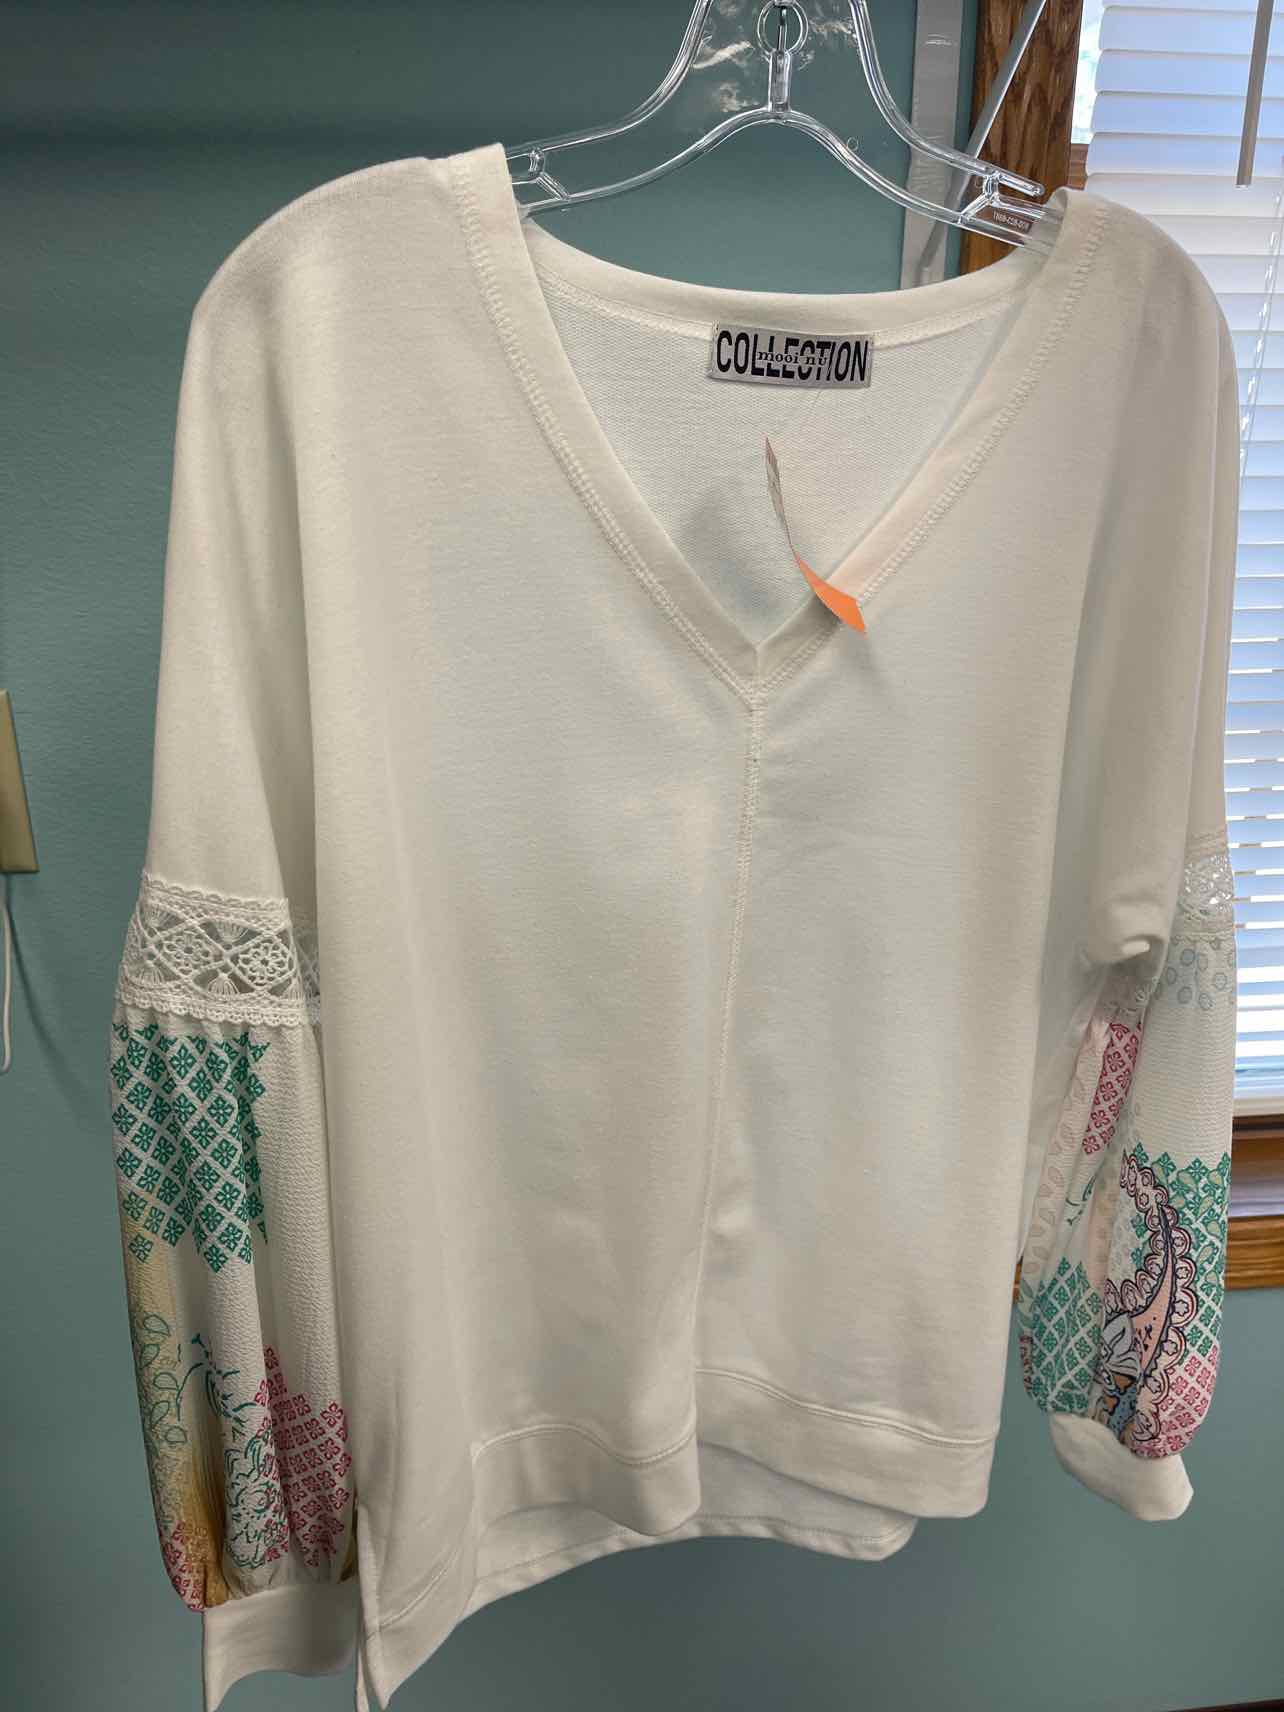 Women's Size Large Collection White Top